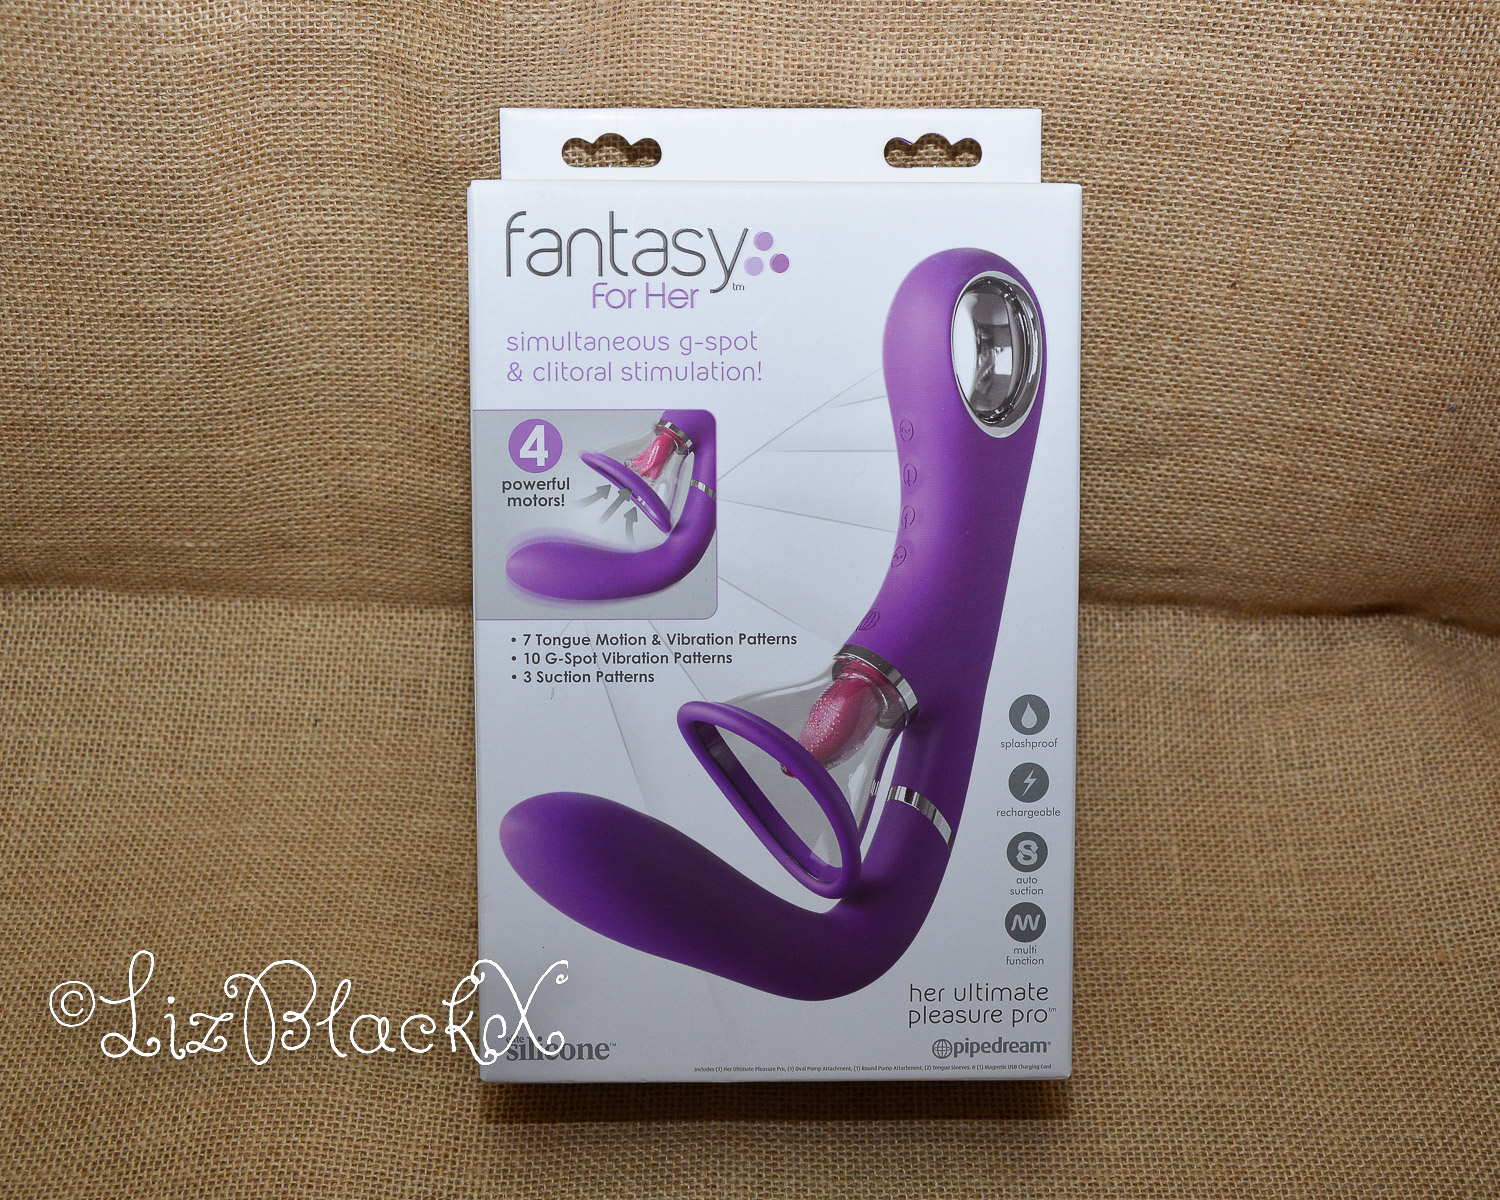 Review of the Her Ultimate Pleasure Pro by Fantasy for Her - Pipedream